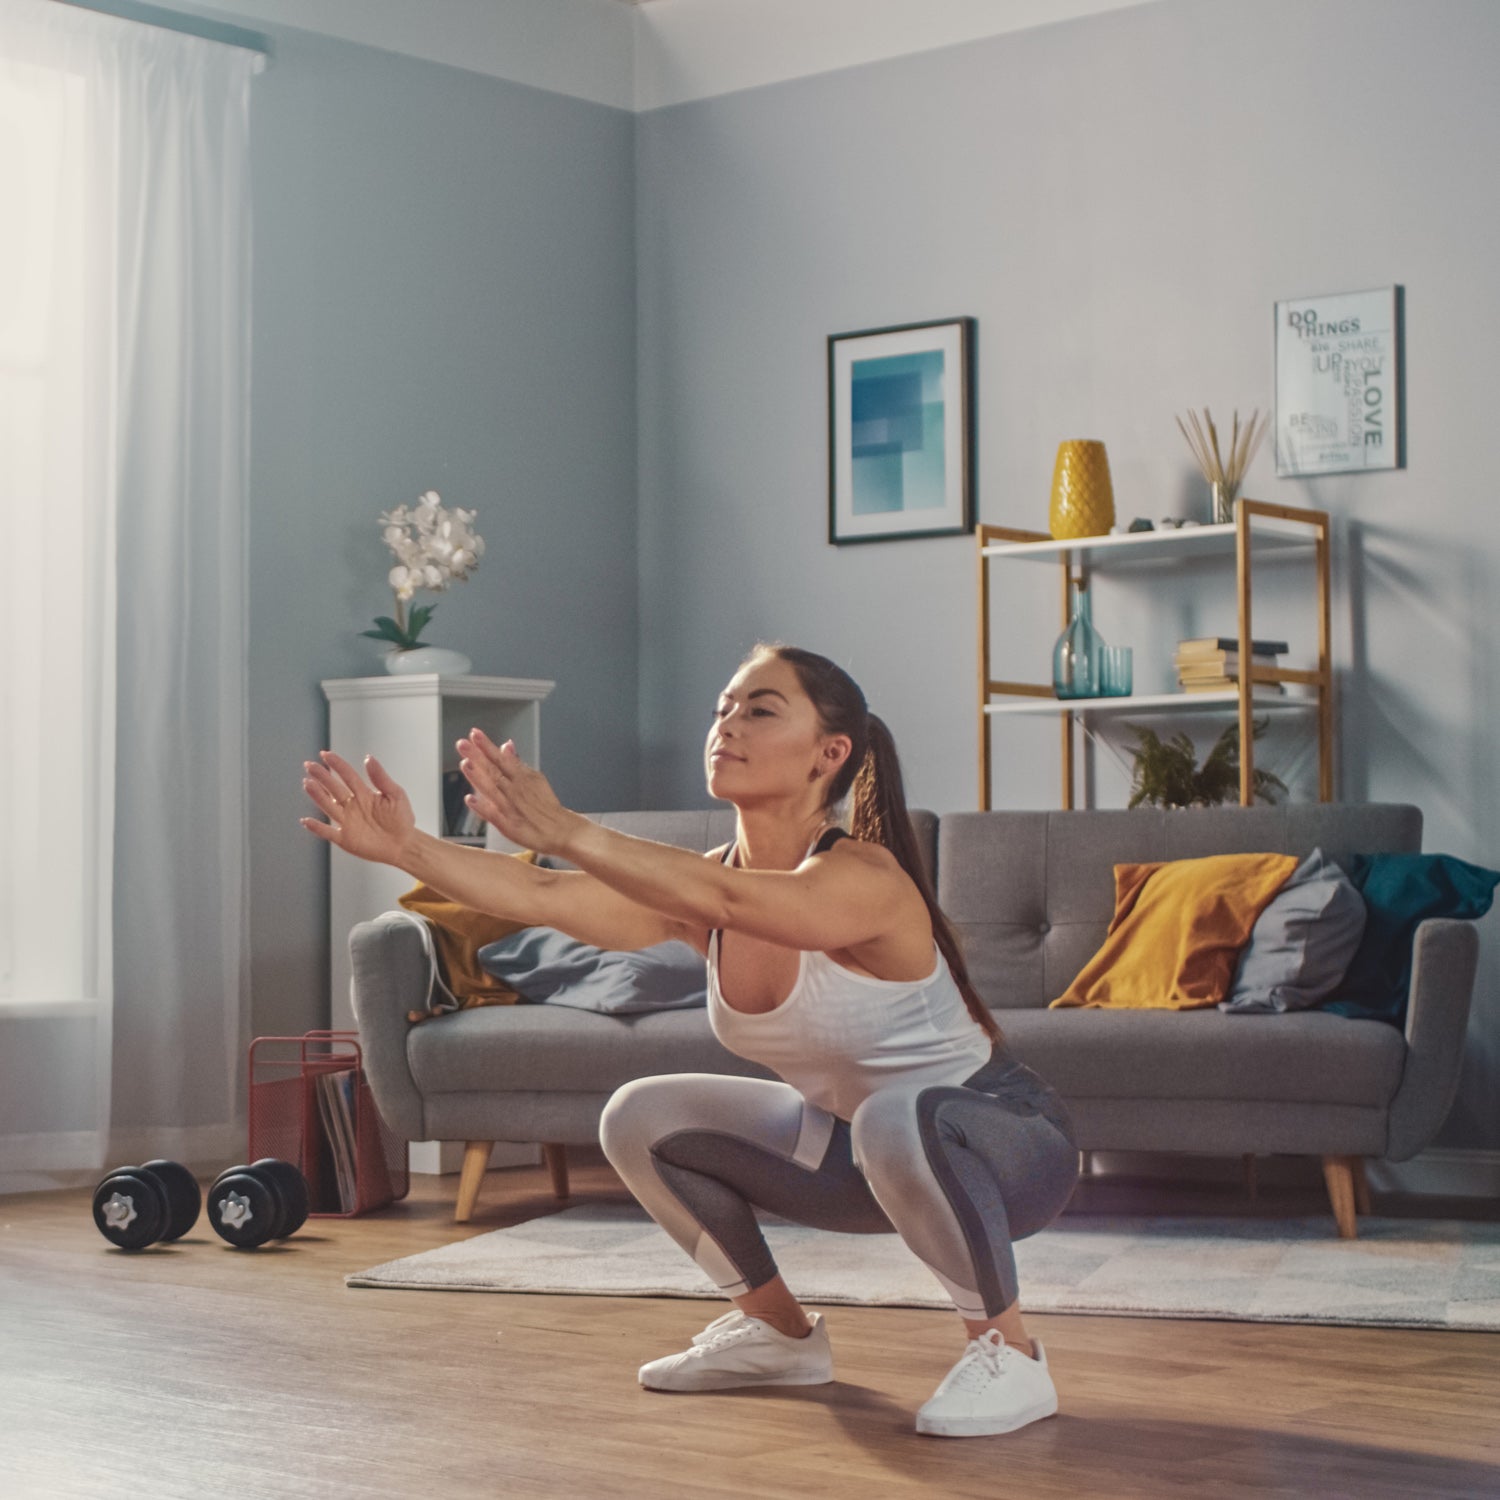 5 Ways Athletes Can Improve Fitness When Working From Home